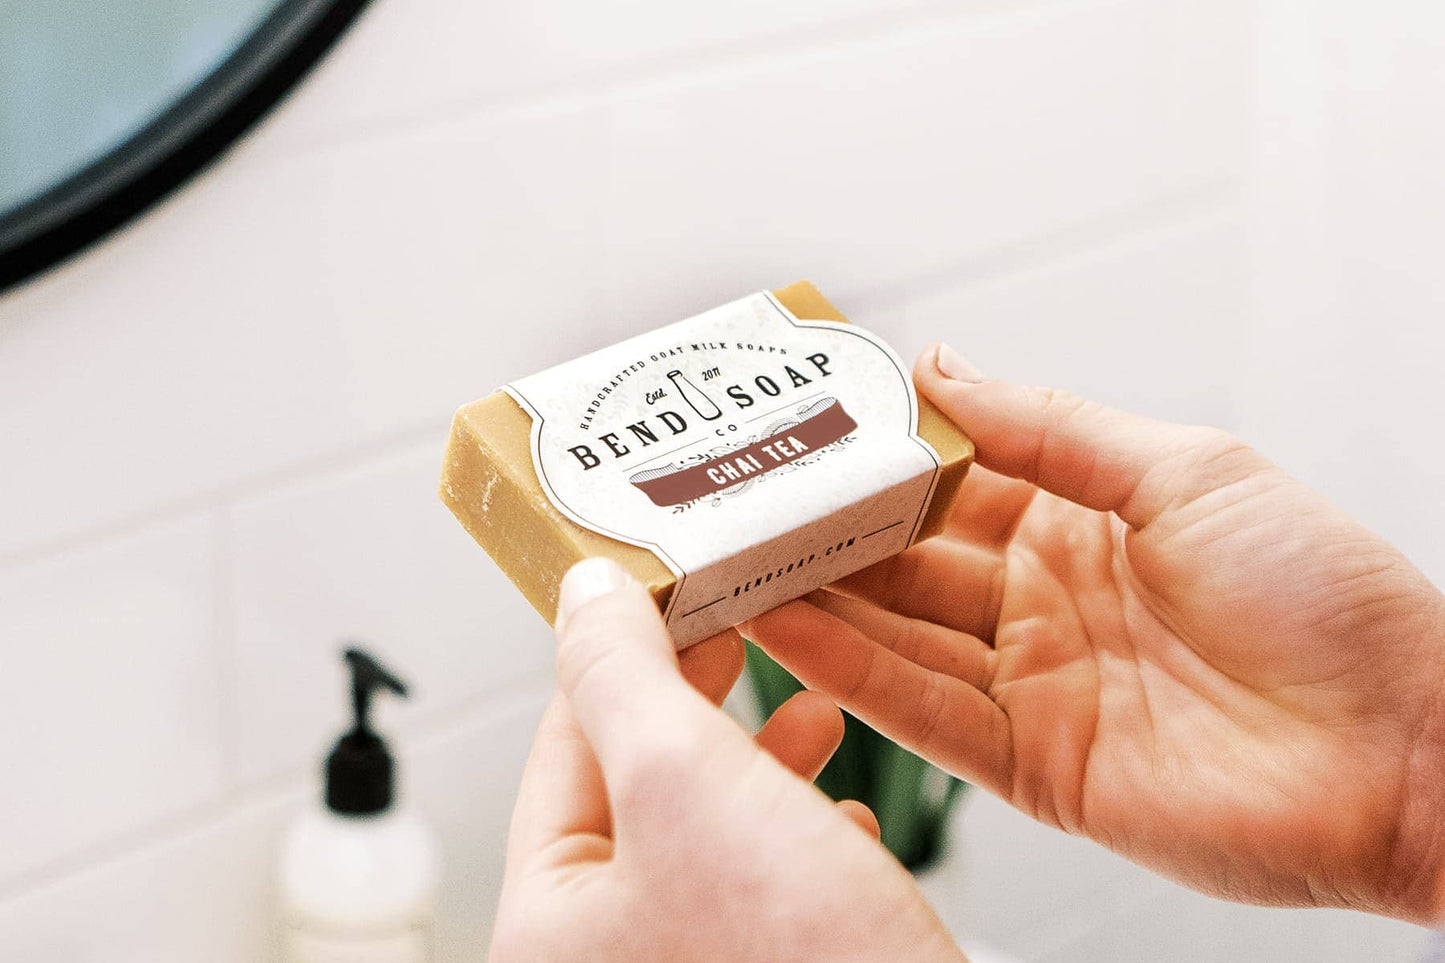 A woman's hands holding a full-size bar of chai tea goat milk soap